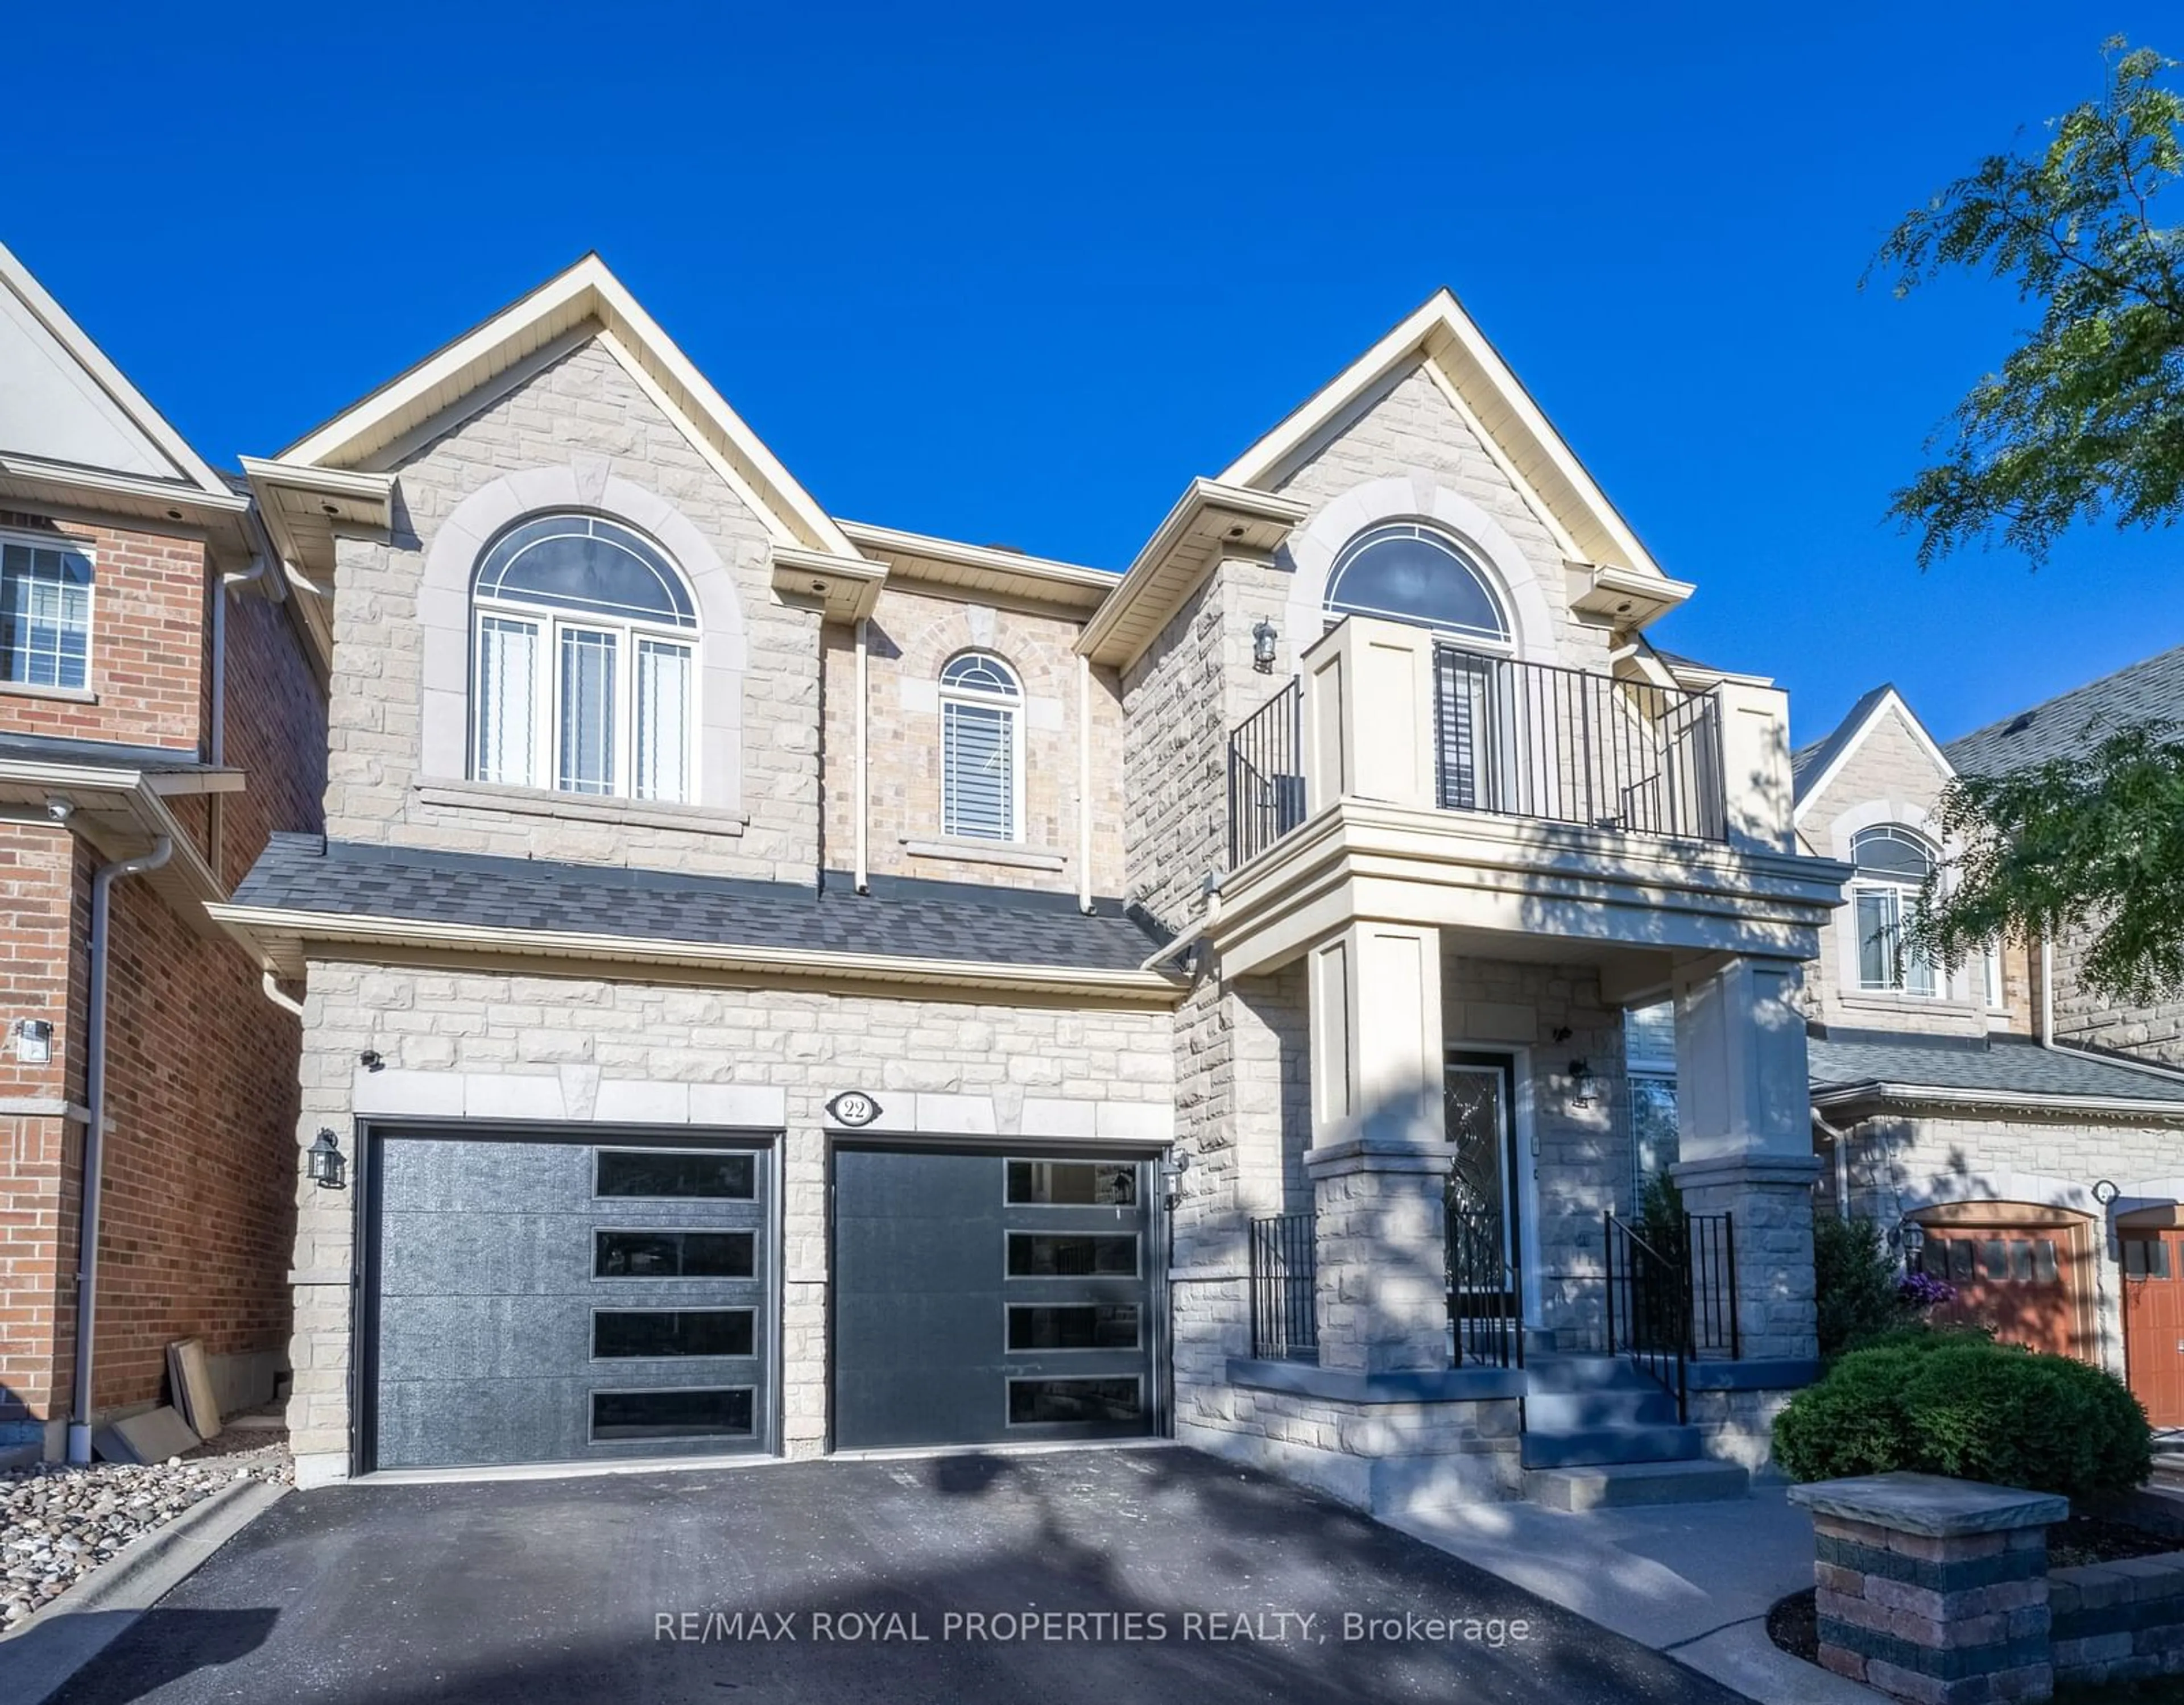 Home with brick exterior material for 22 Carberry Cres, Ajax Ontario L1Z 1S1